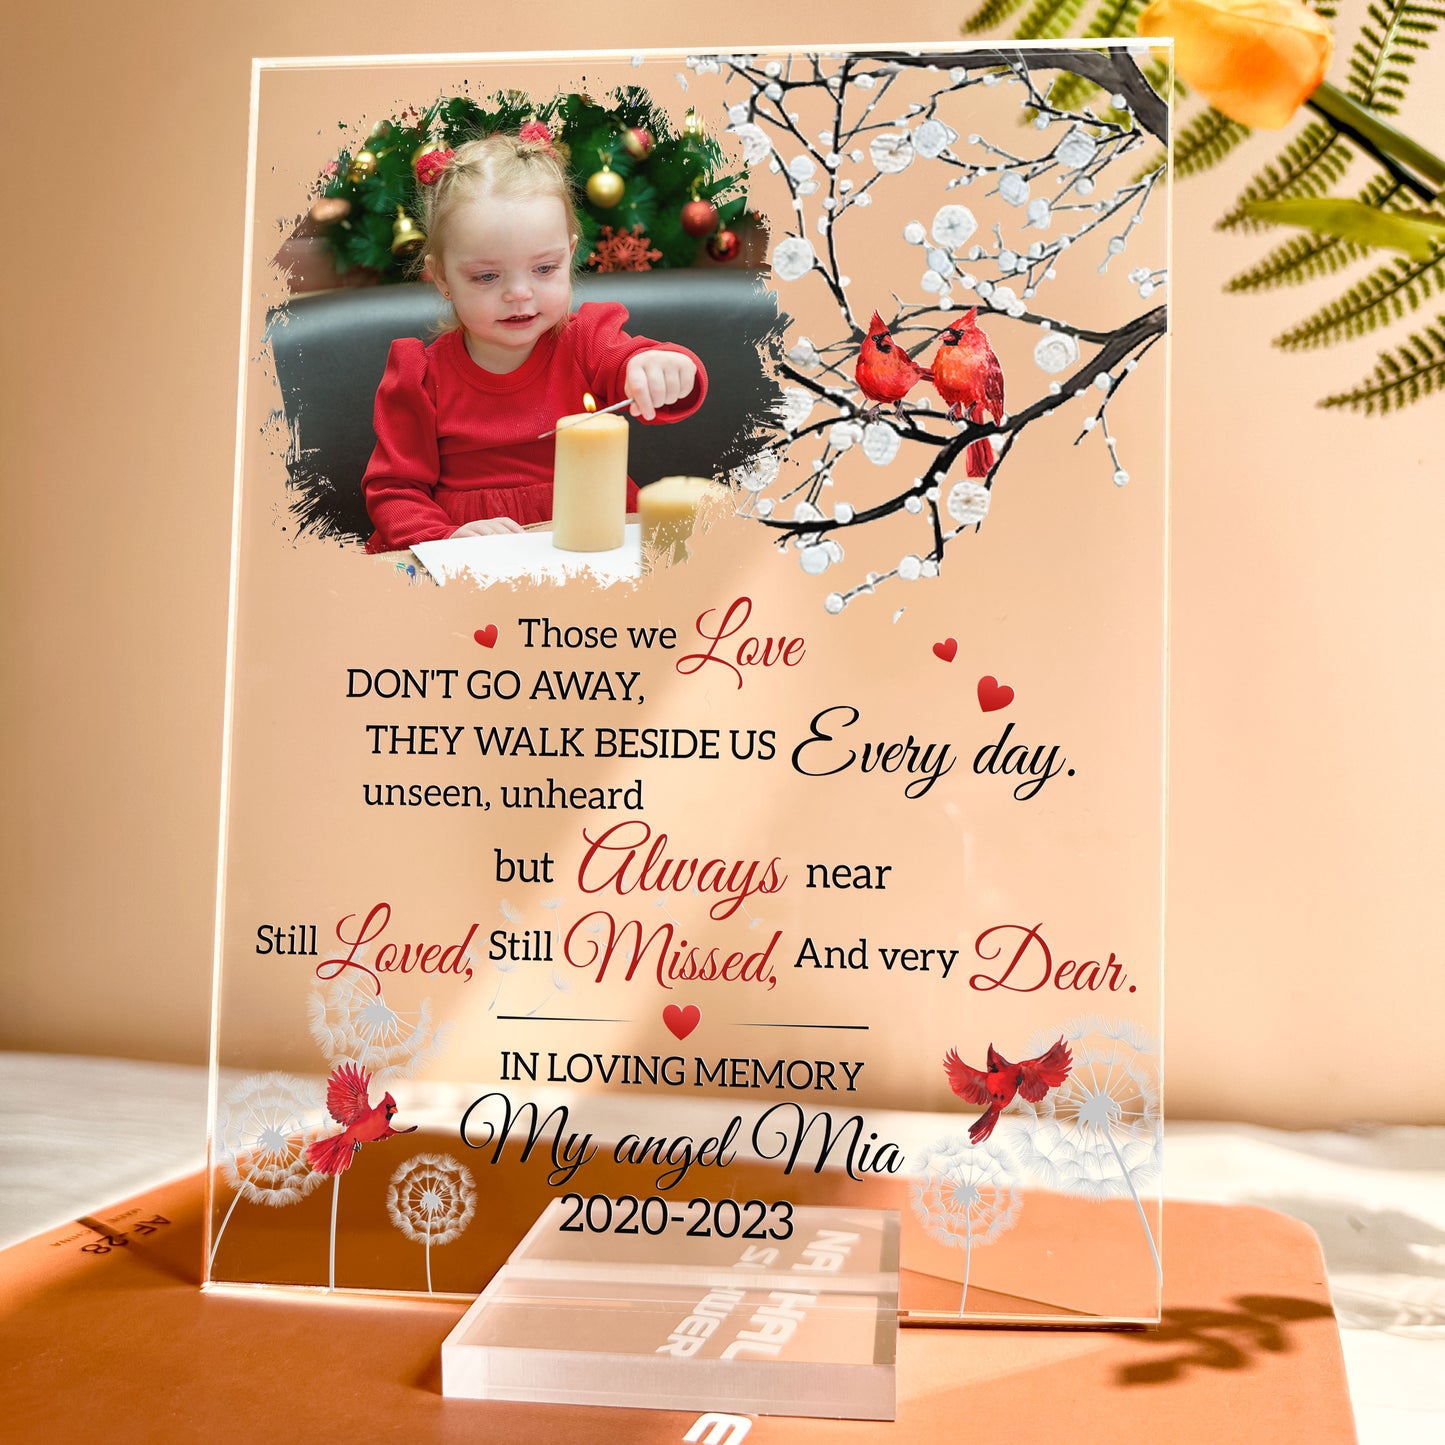 Those We Love Don't Go Away Memorial Gift - Personalized Acrylic Photo Plaque